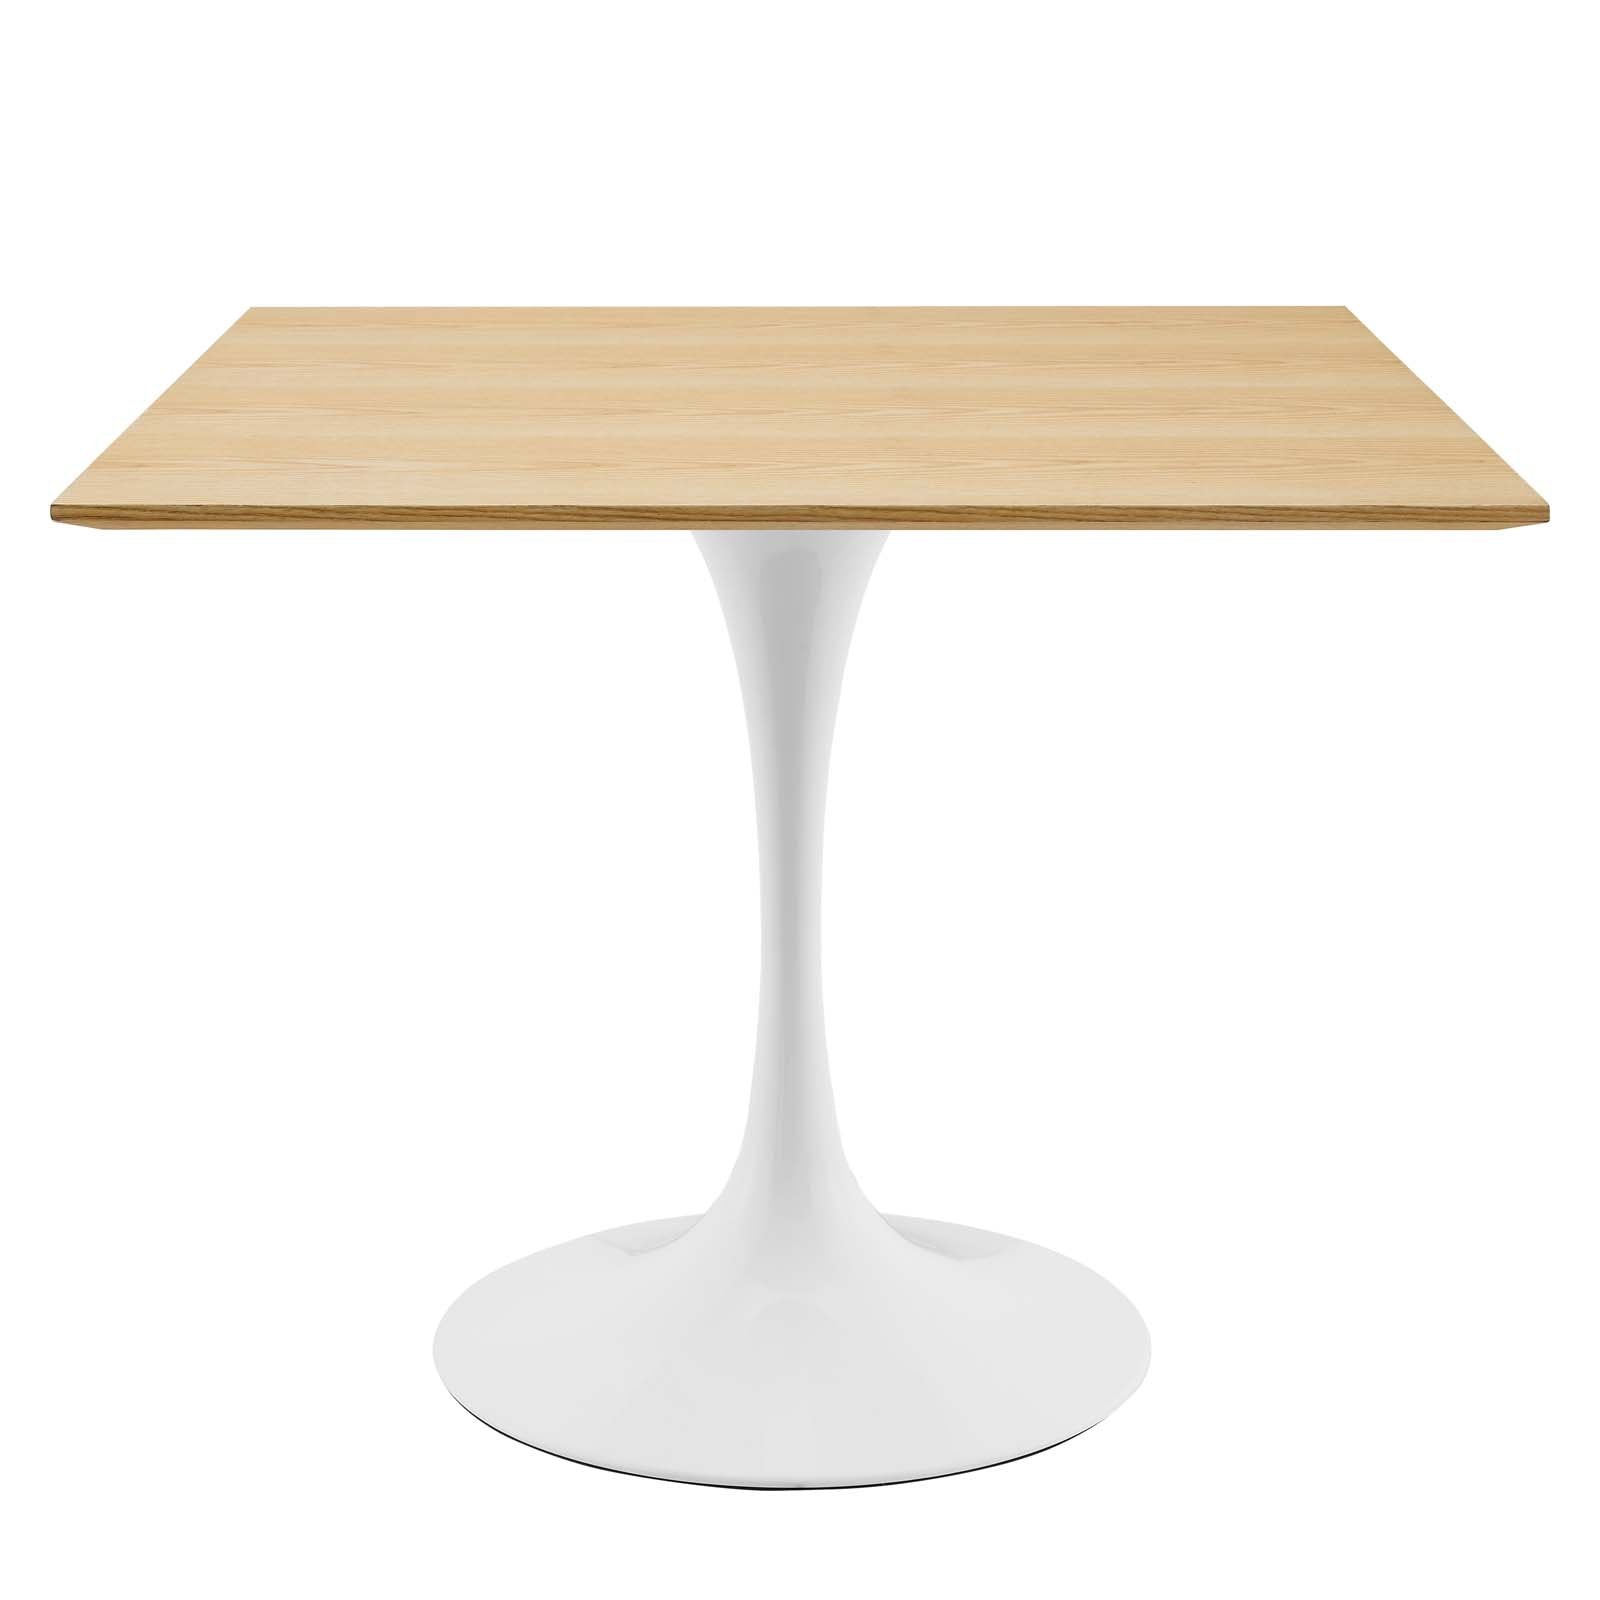 Lippa 36" Square Dining Table